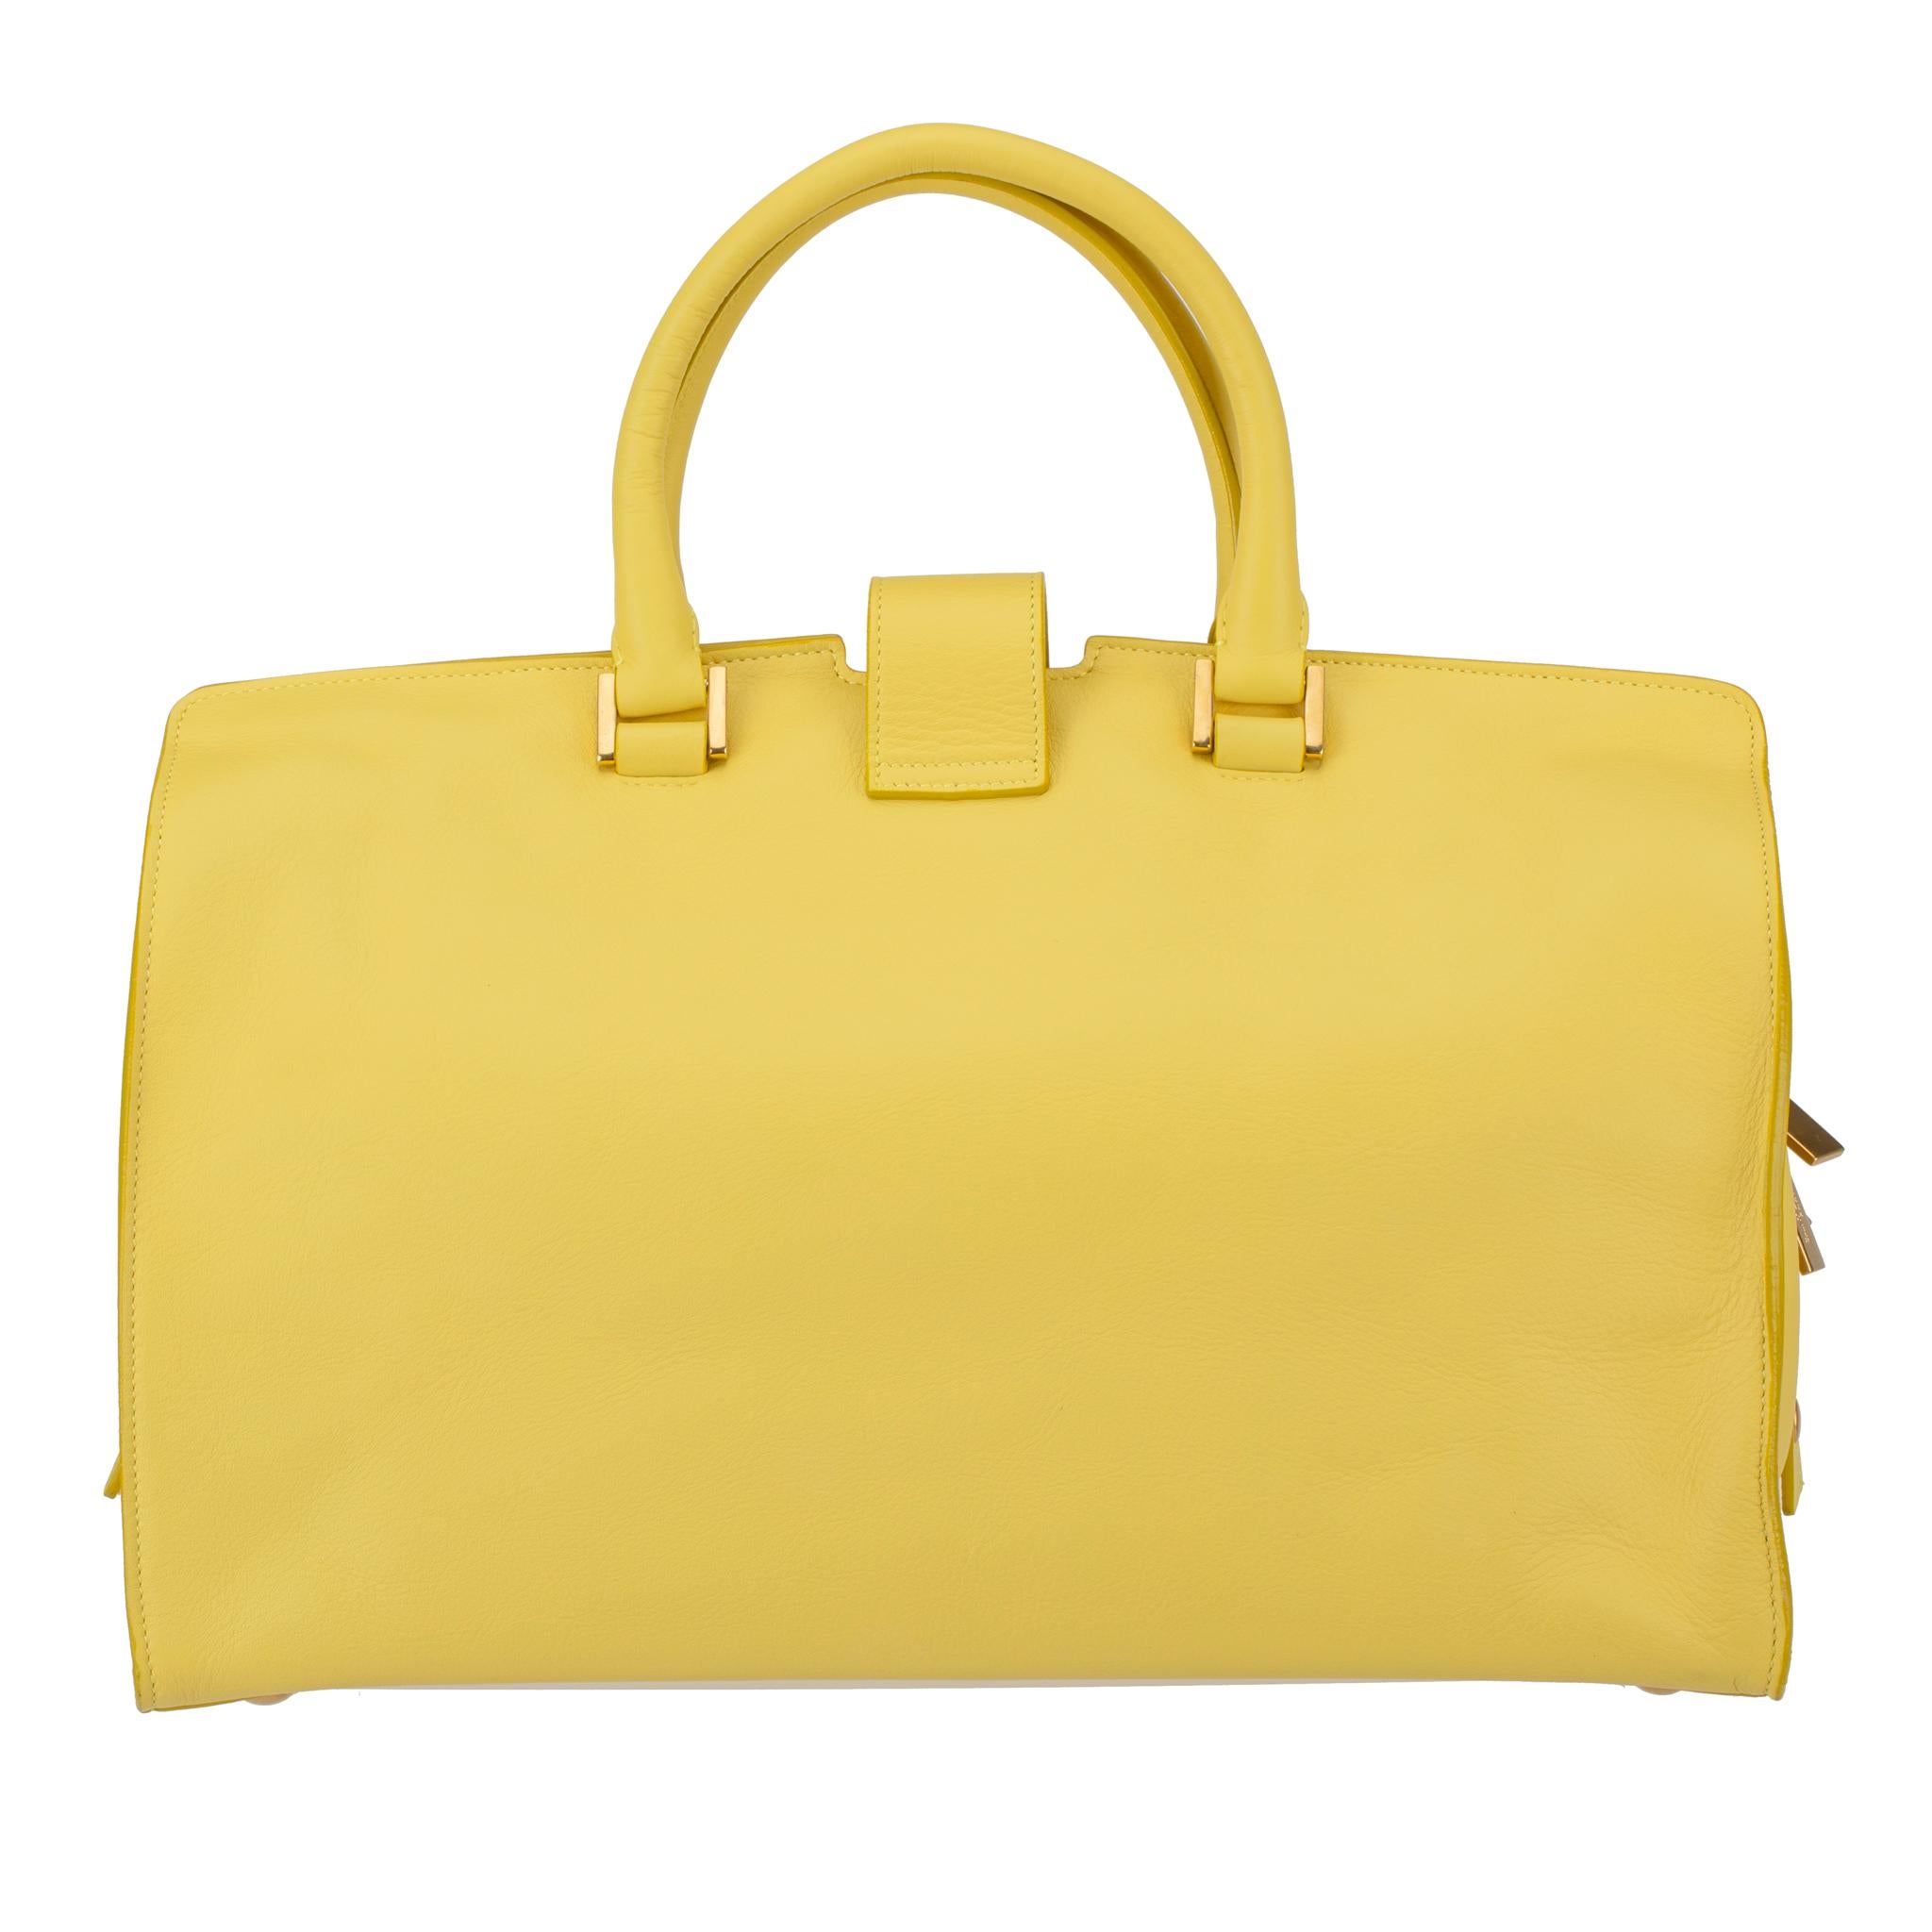 Yves Saint Laurent Cabas Chyc Tote Yellow Aged Gold Hardware For Sale 10